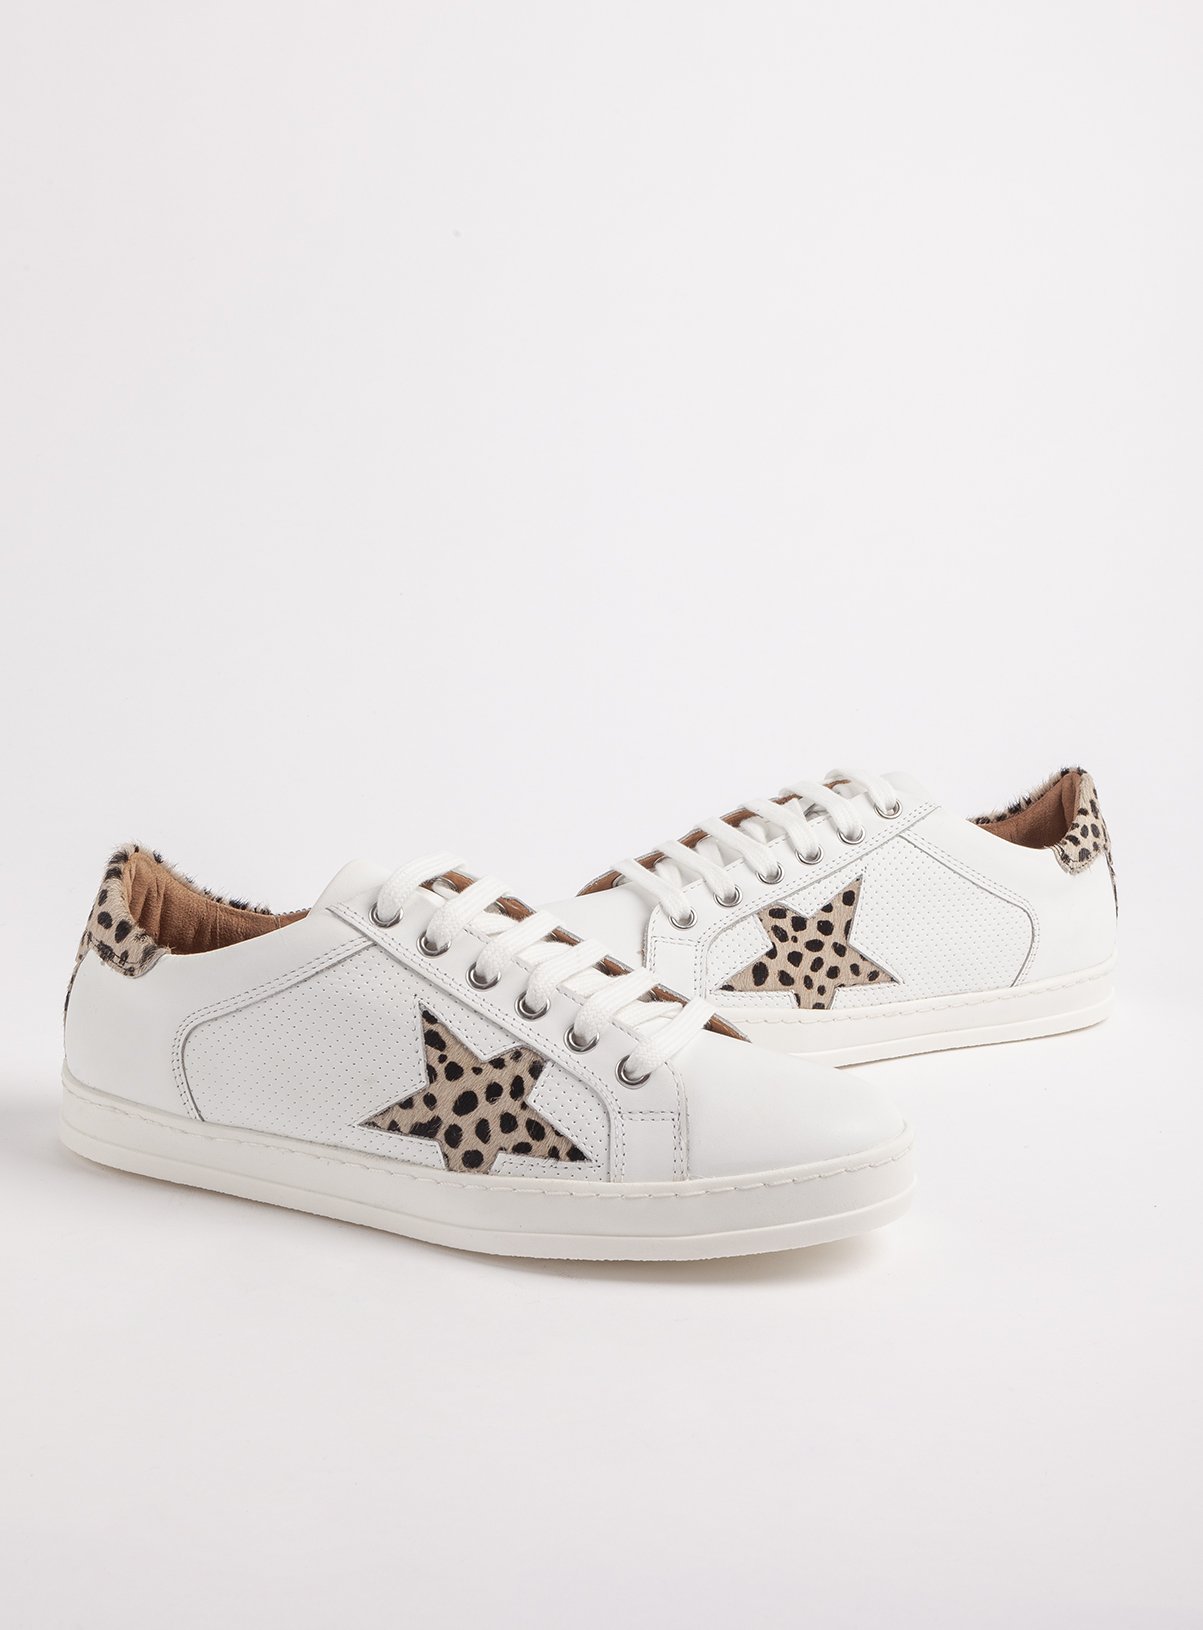 marco tozzi rose gold trainers